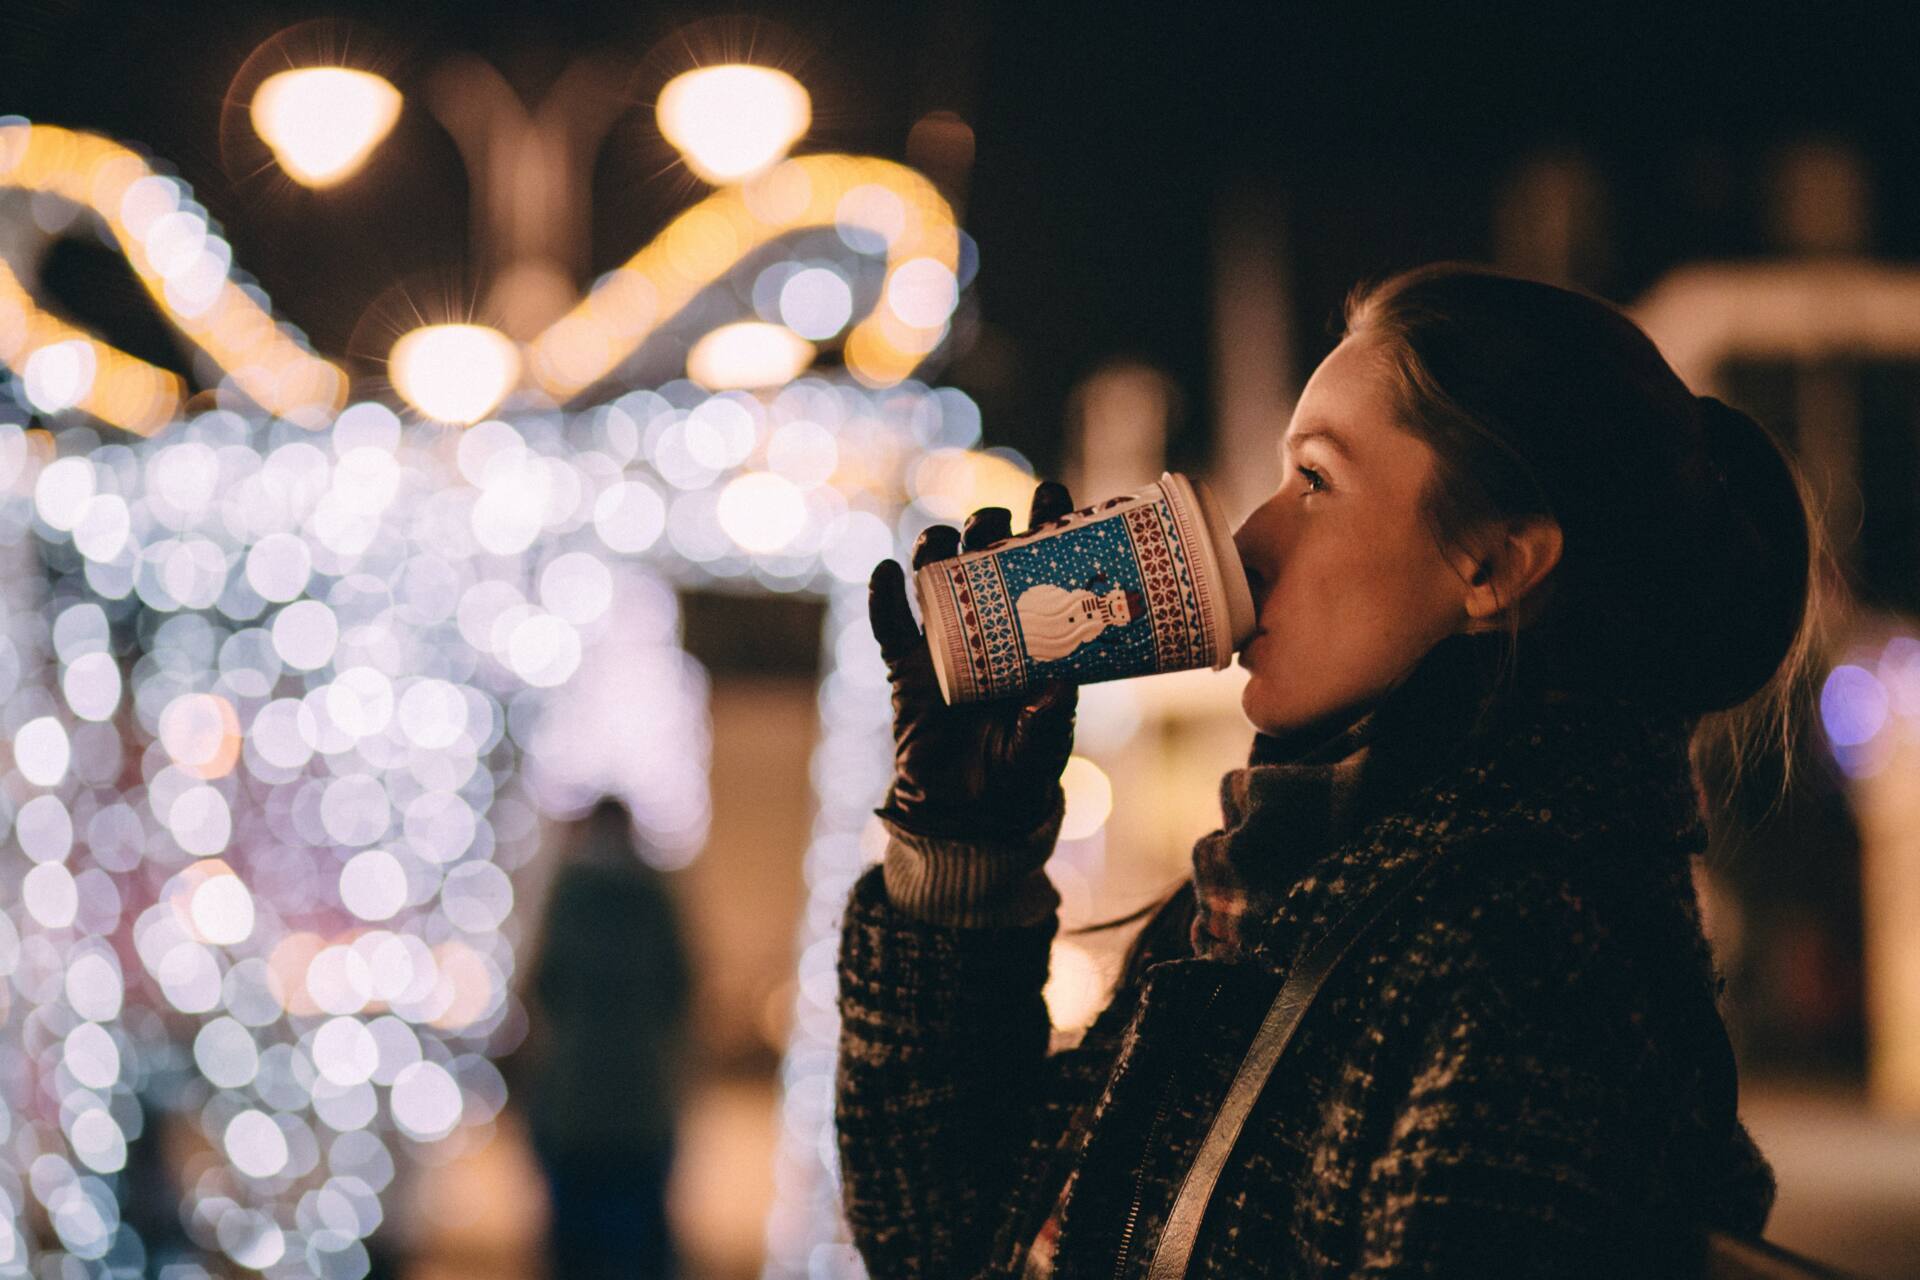 Woman drinking hot cocoa in front of holiday lights